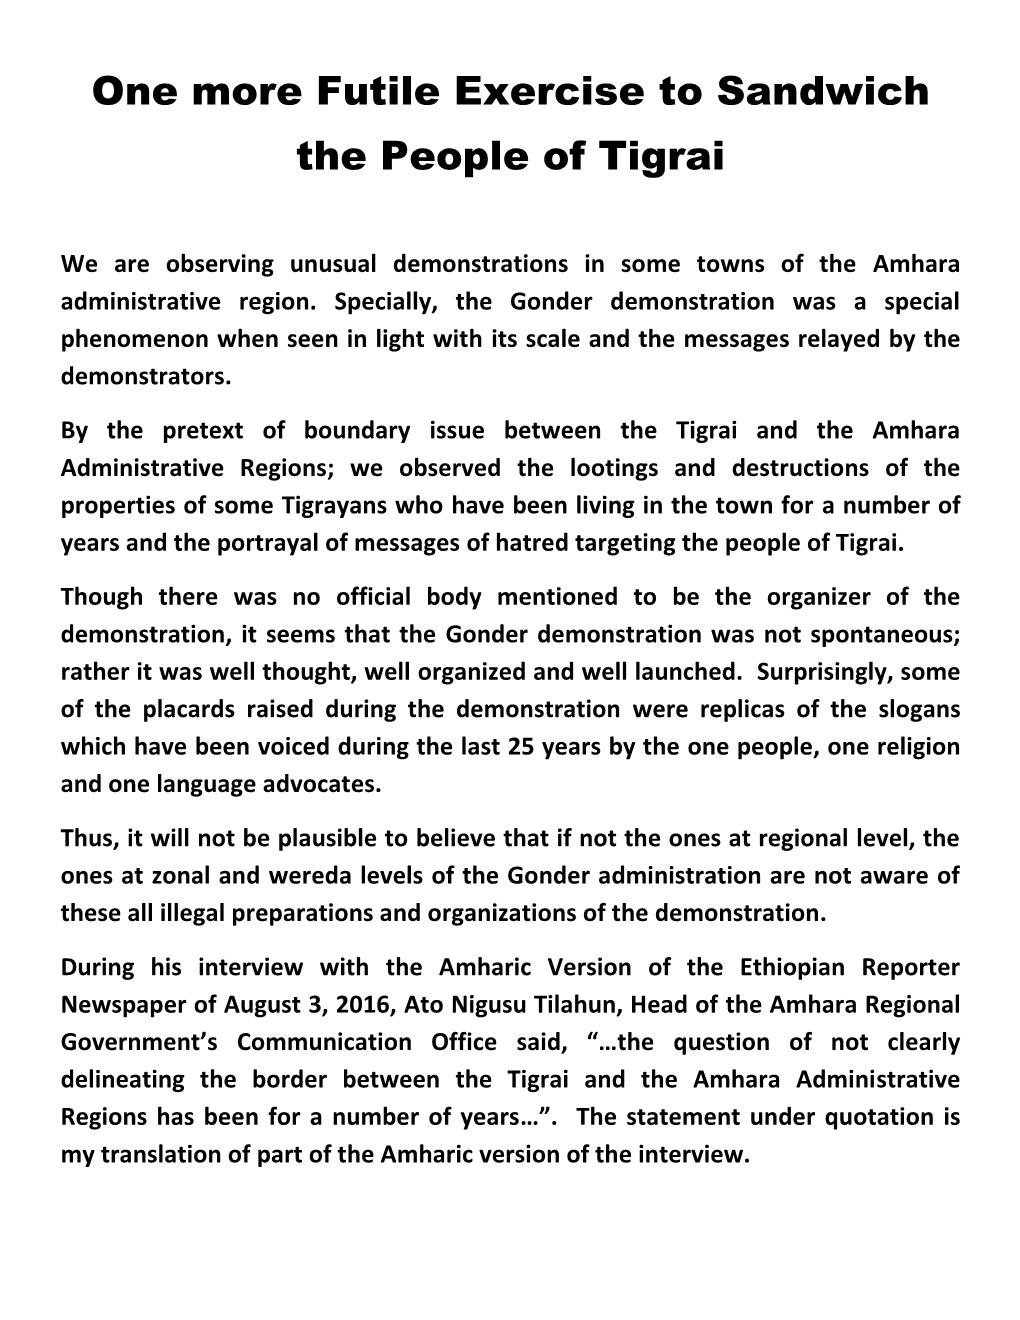 One More Futile Exercise to Sandwich the People of Tigrai